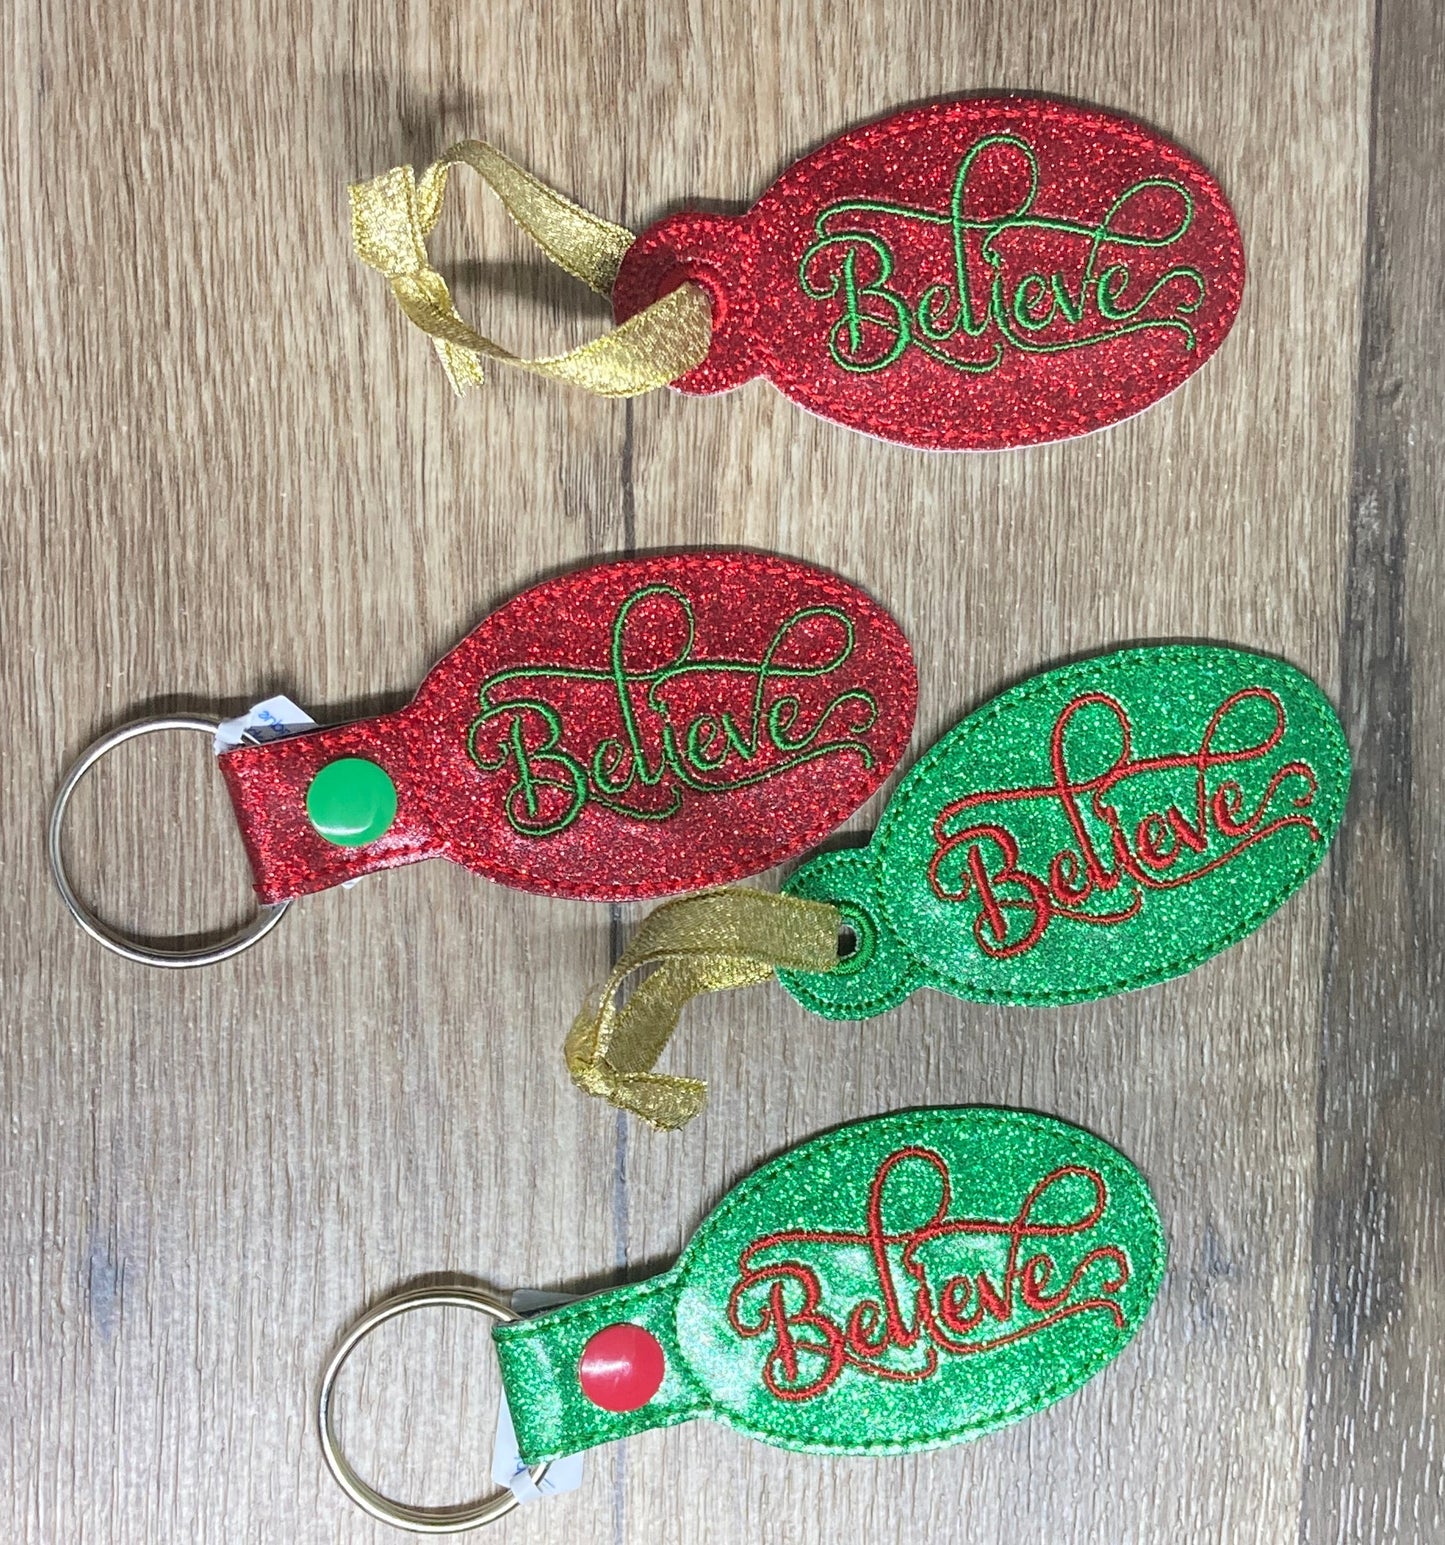 Believe Christmas Ornament and Snaptab Keychain